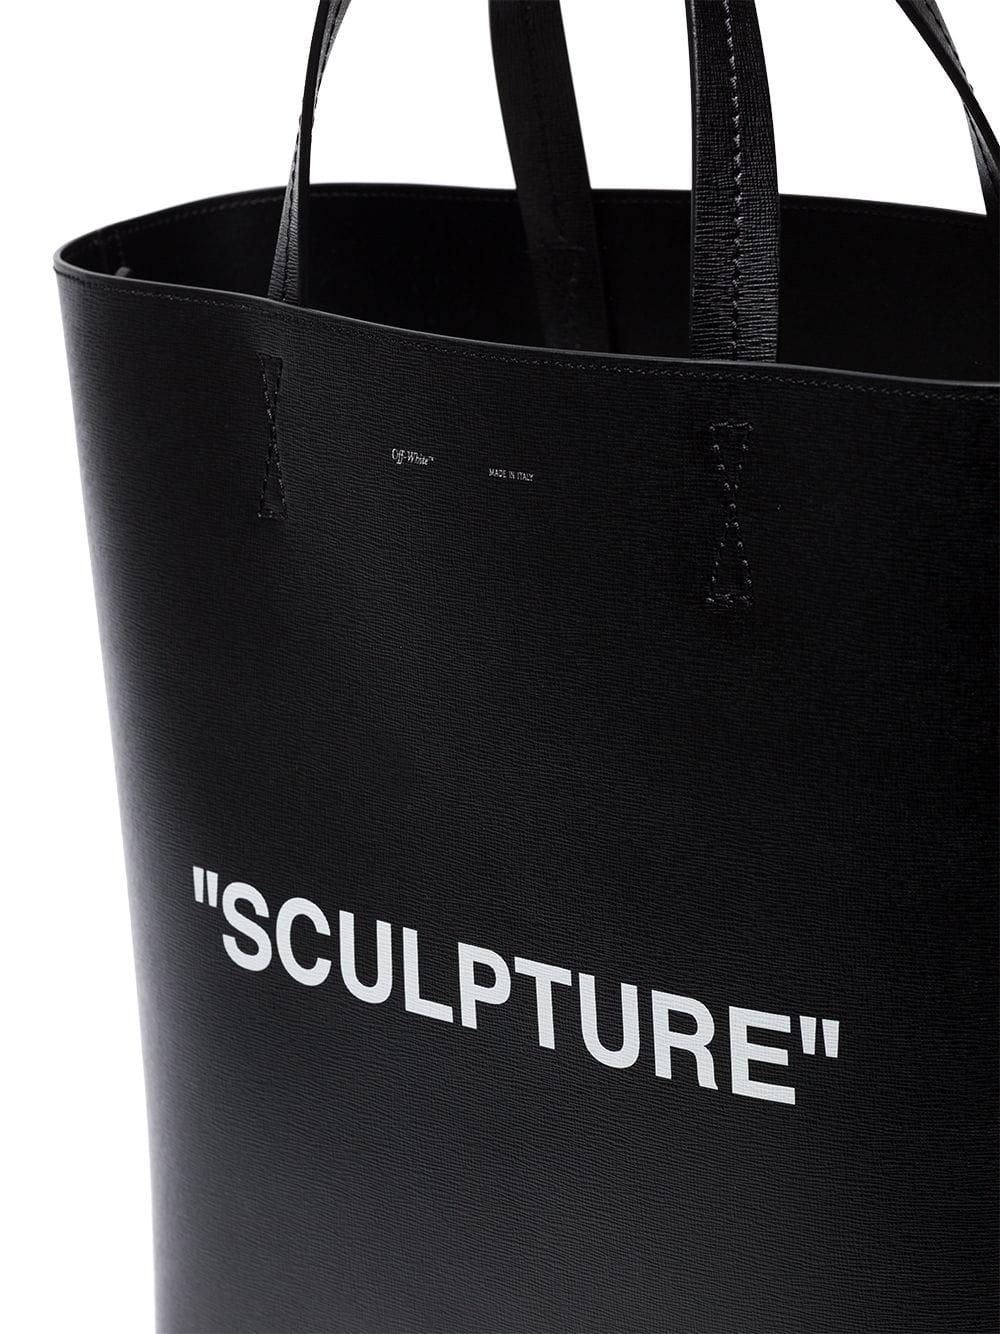 Off-White Black Leather Sculpture Tote Bag one size In Excellent Condition In London, GB